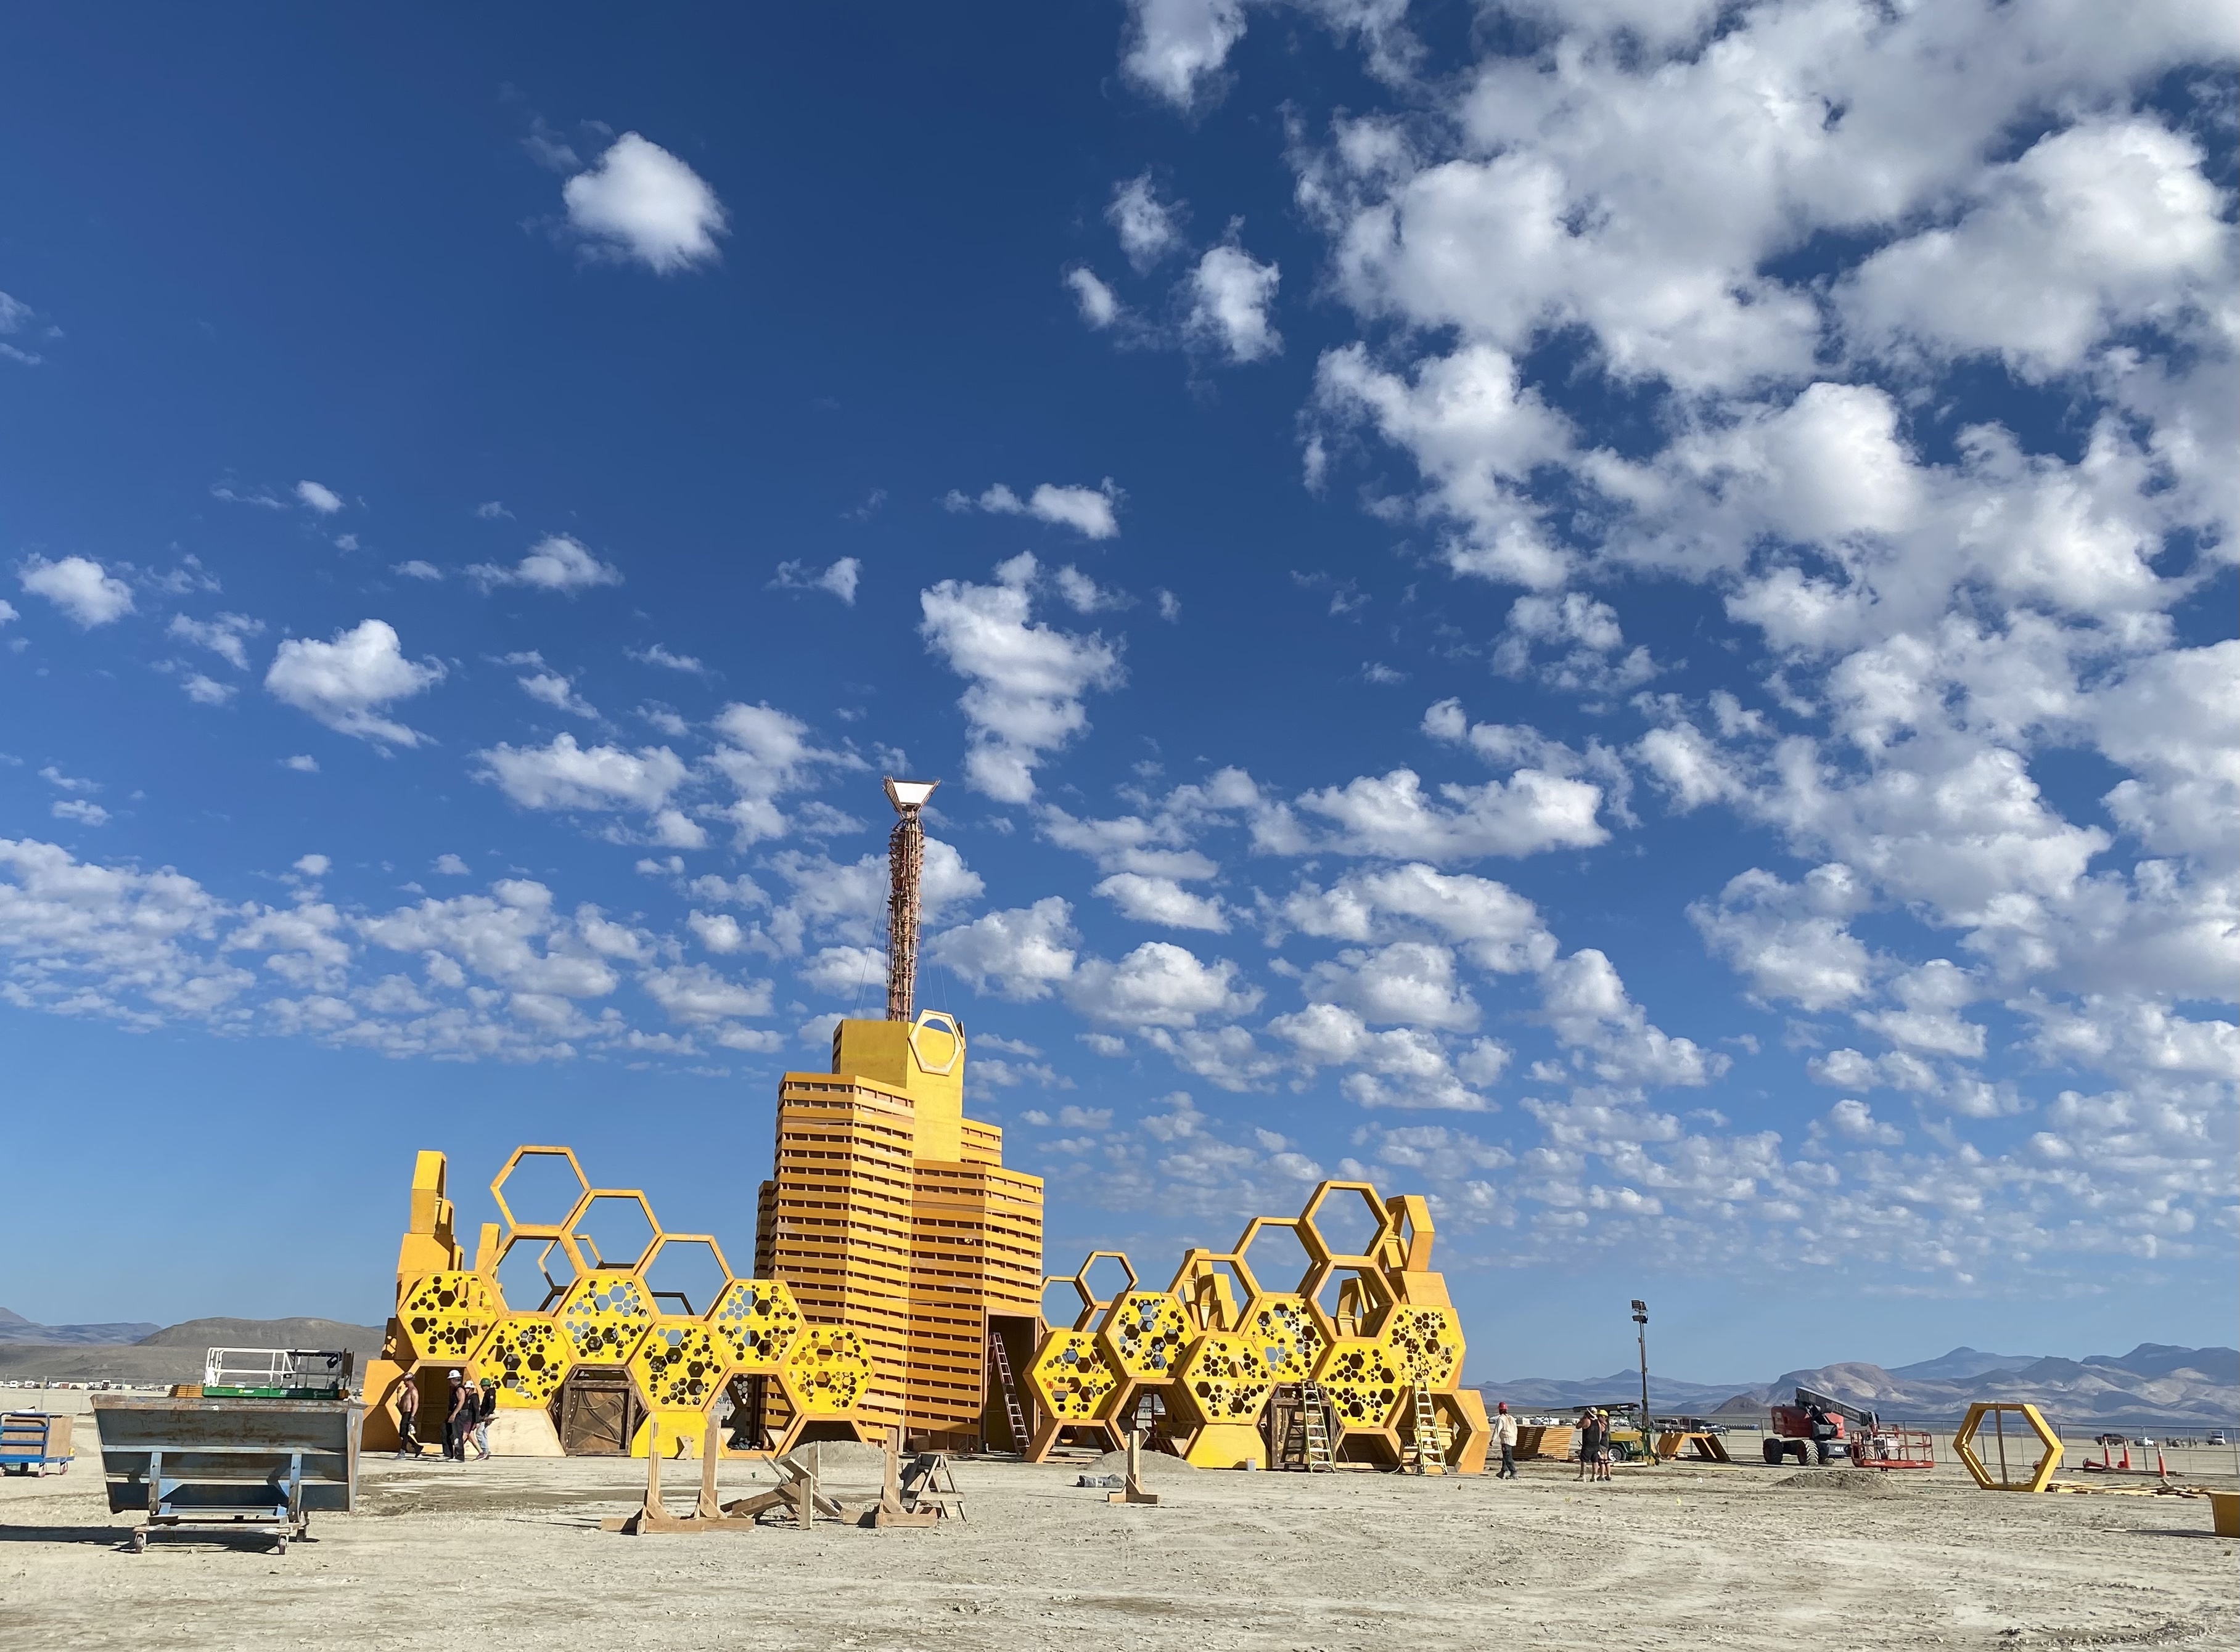 Honeycomb structures surround the base of &quot;The Hive&quot; at Burning Man 2023 in the Nevada desert.